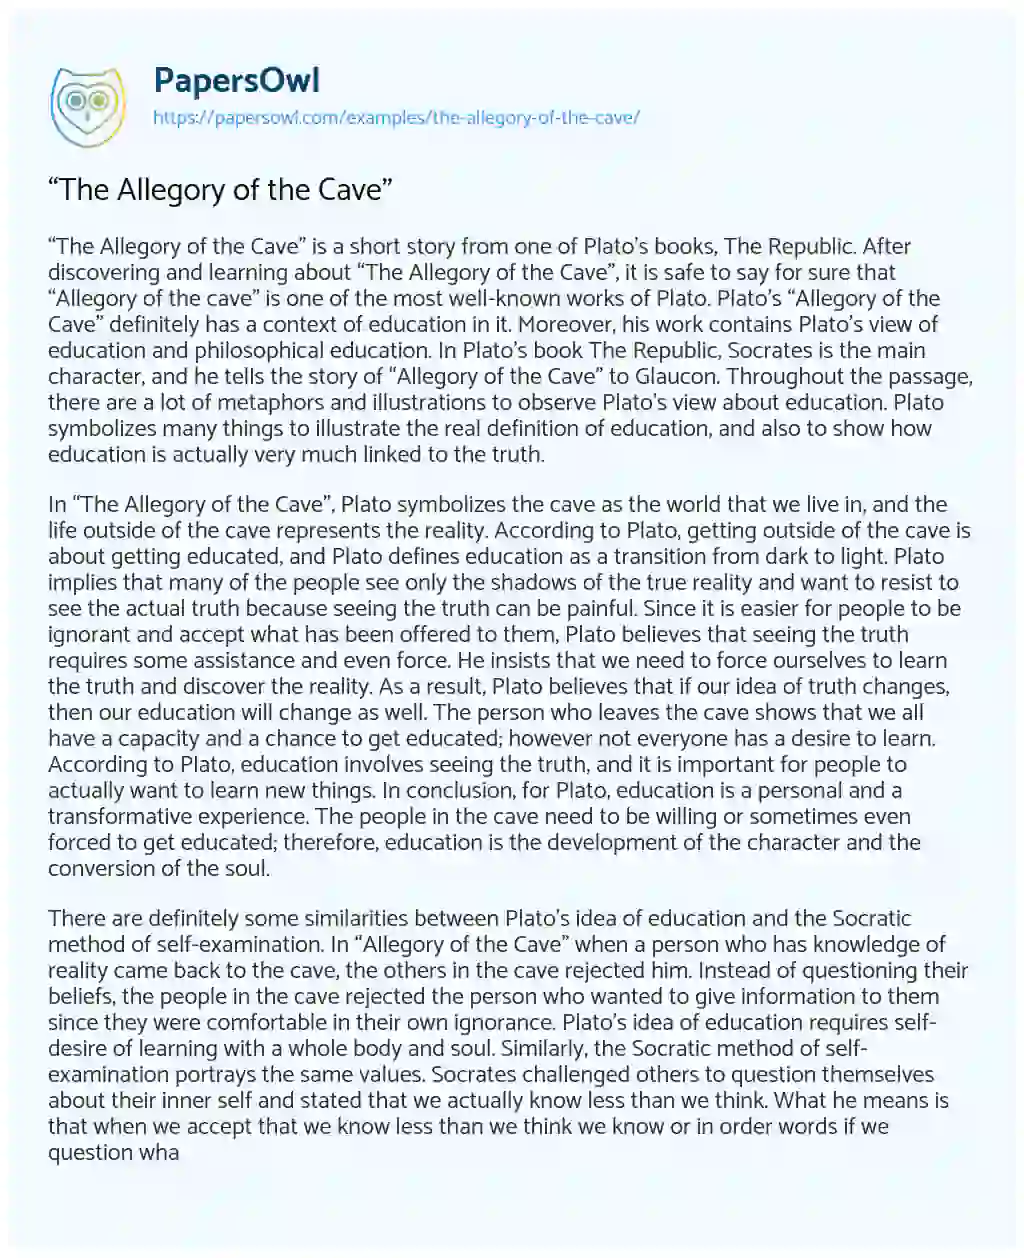 “The Allegory of the Cave” essay